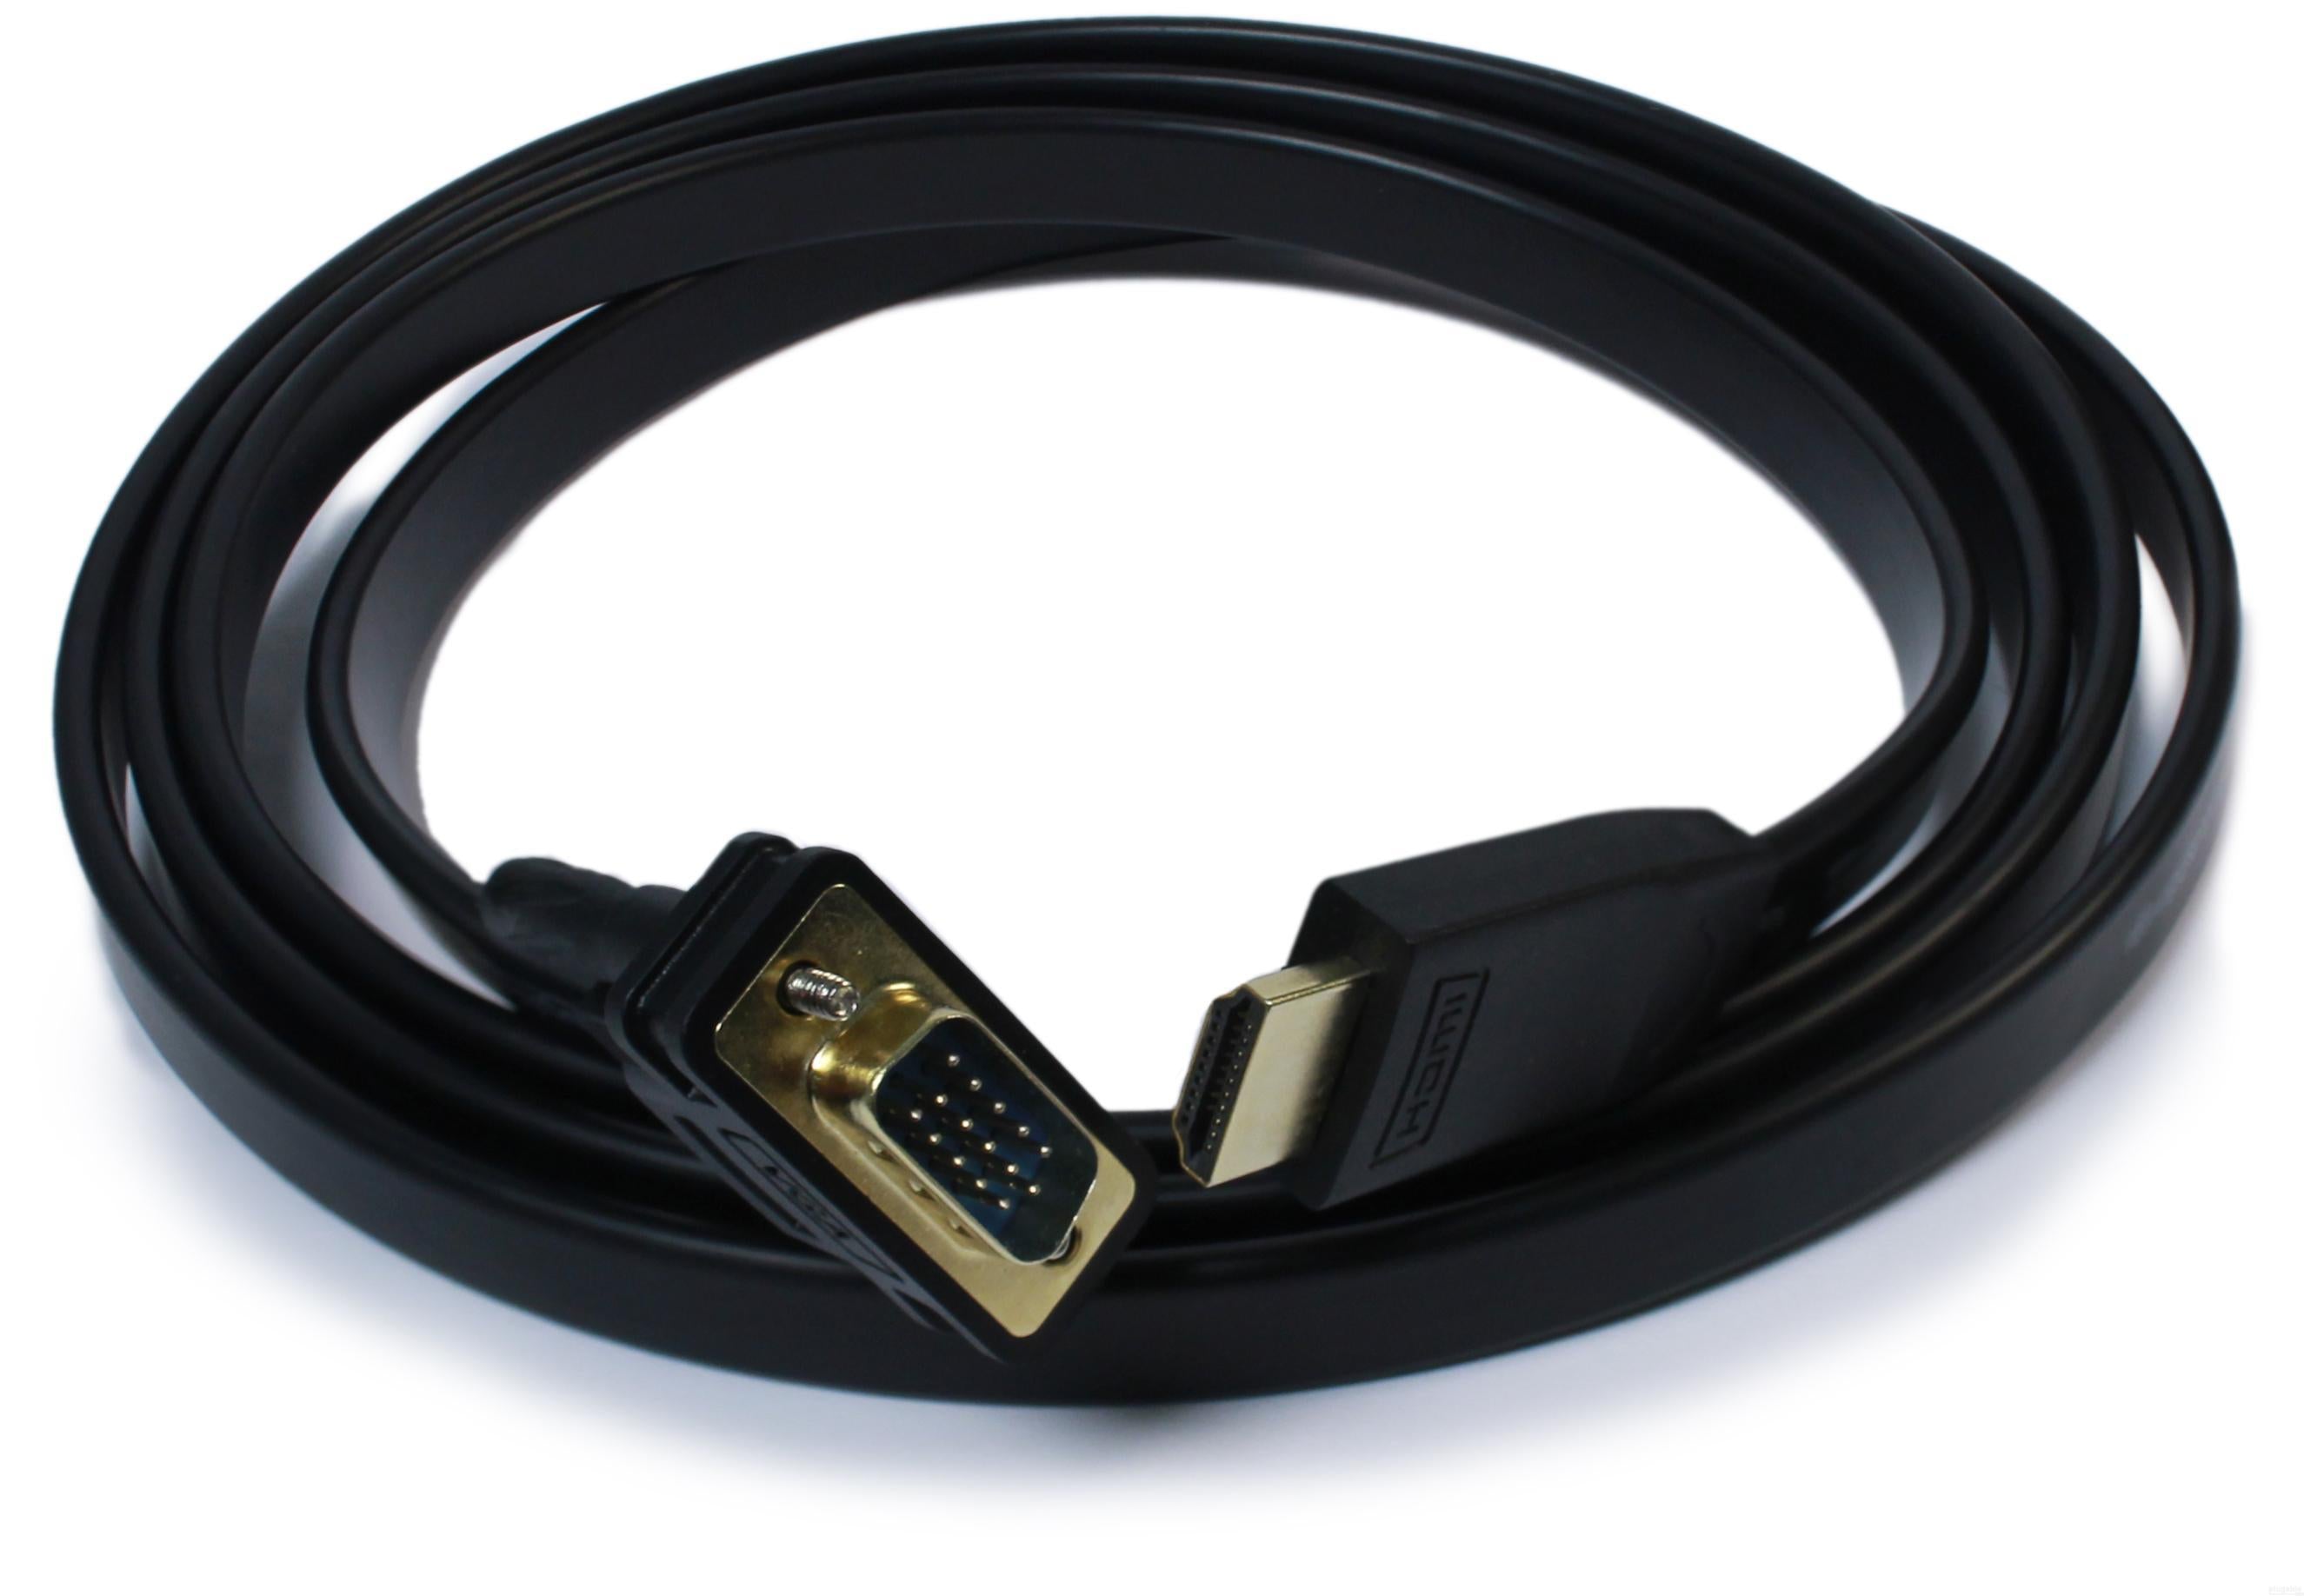 Plugable to VGA Active Adapter Cable – Plugable